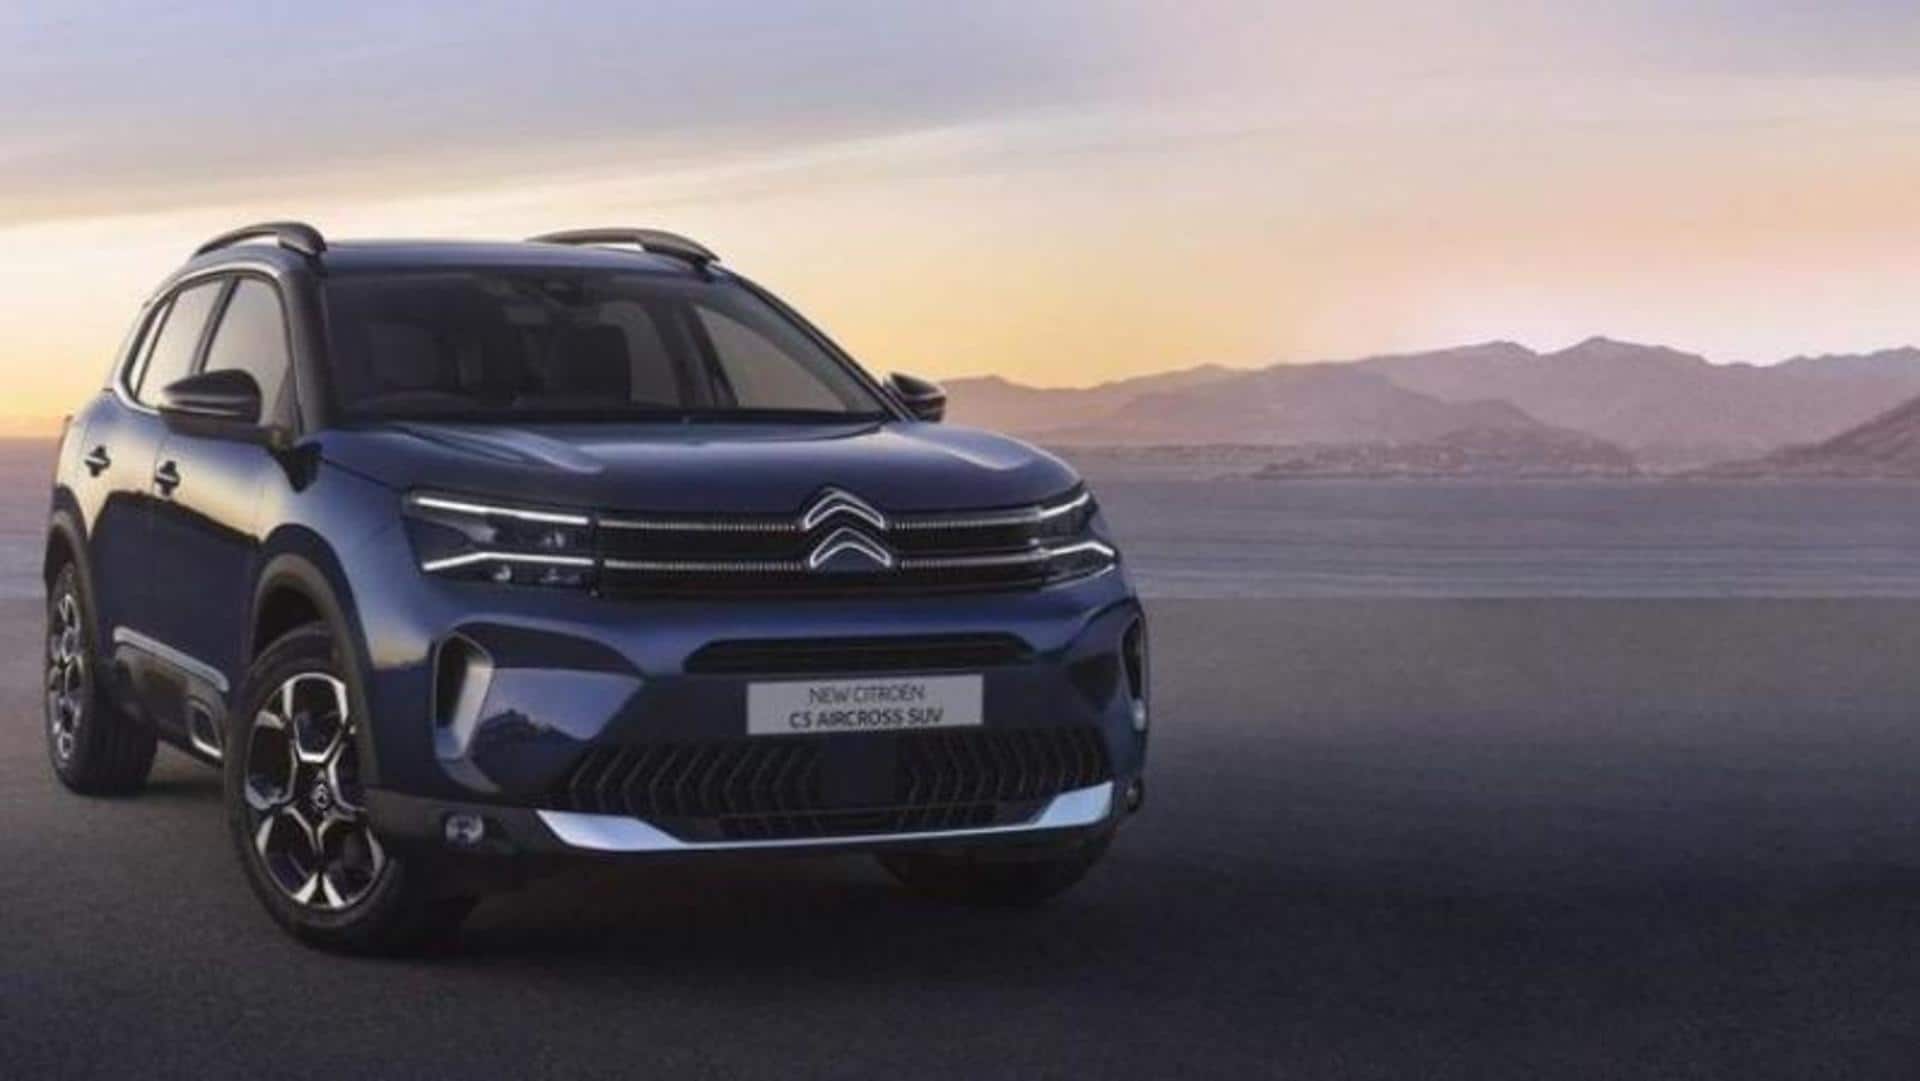 Citroen C3 and C5 Aircross to become costlier from January